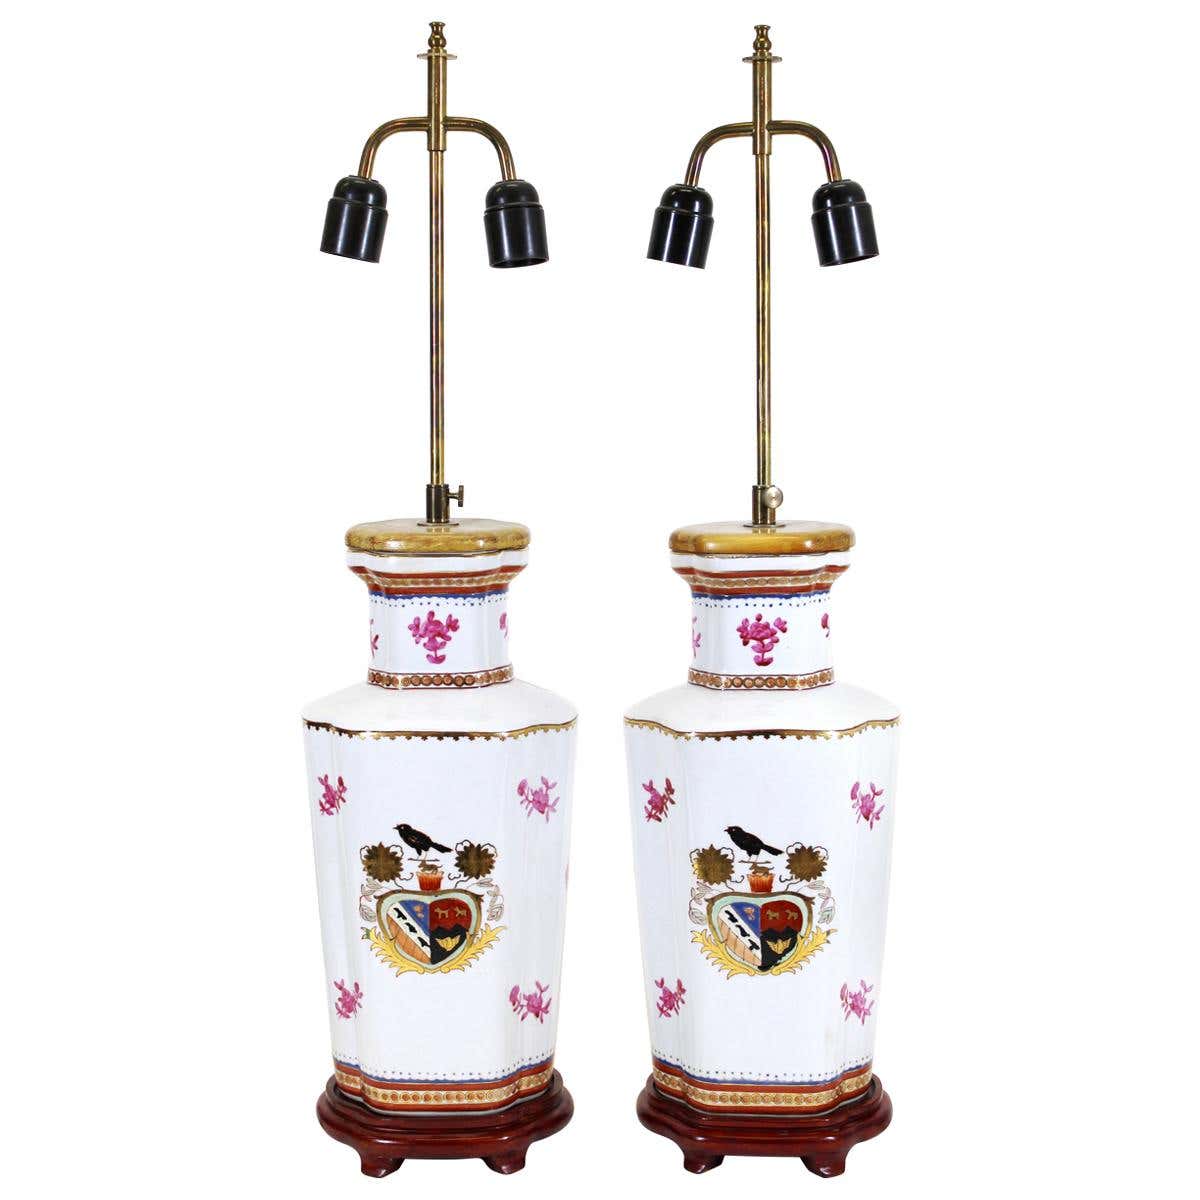 CHINESE EXPORT ARMORIAL PORCELAIN